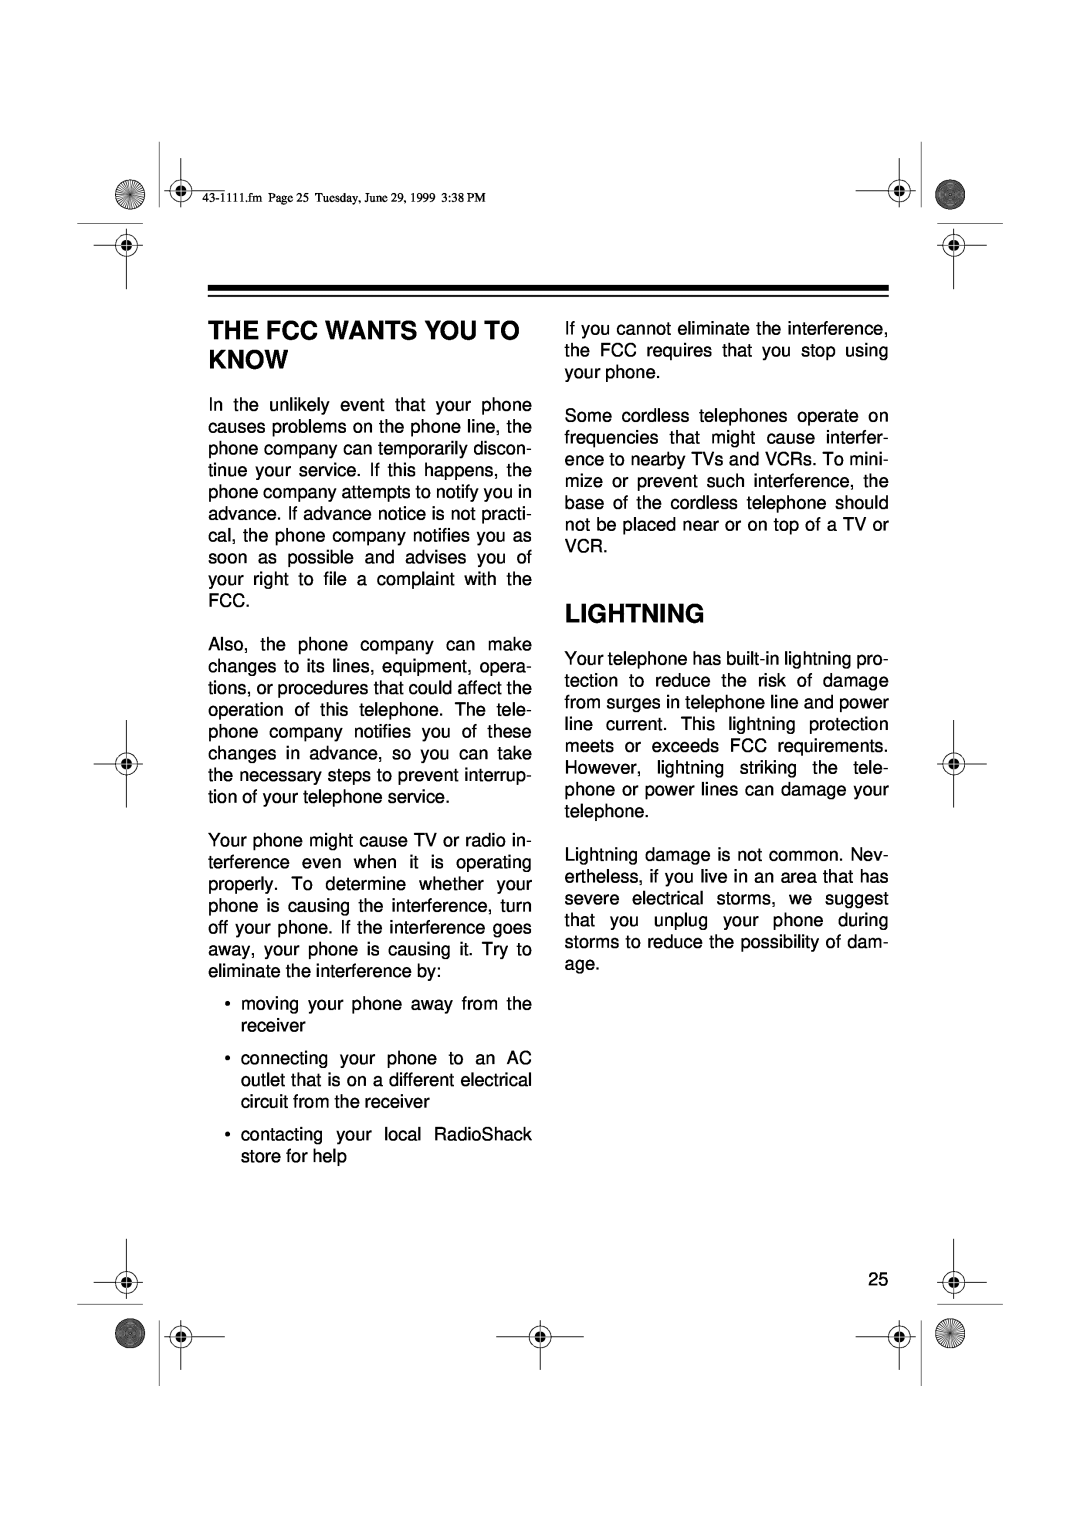 Radio Shack ET-1111 owner manual The Fcc Wants You To Know, Lightning 